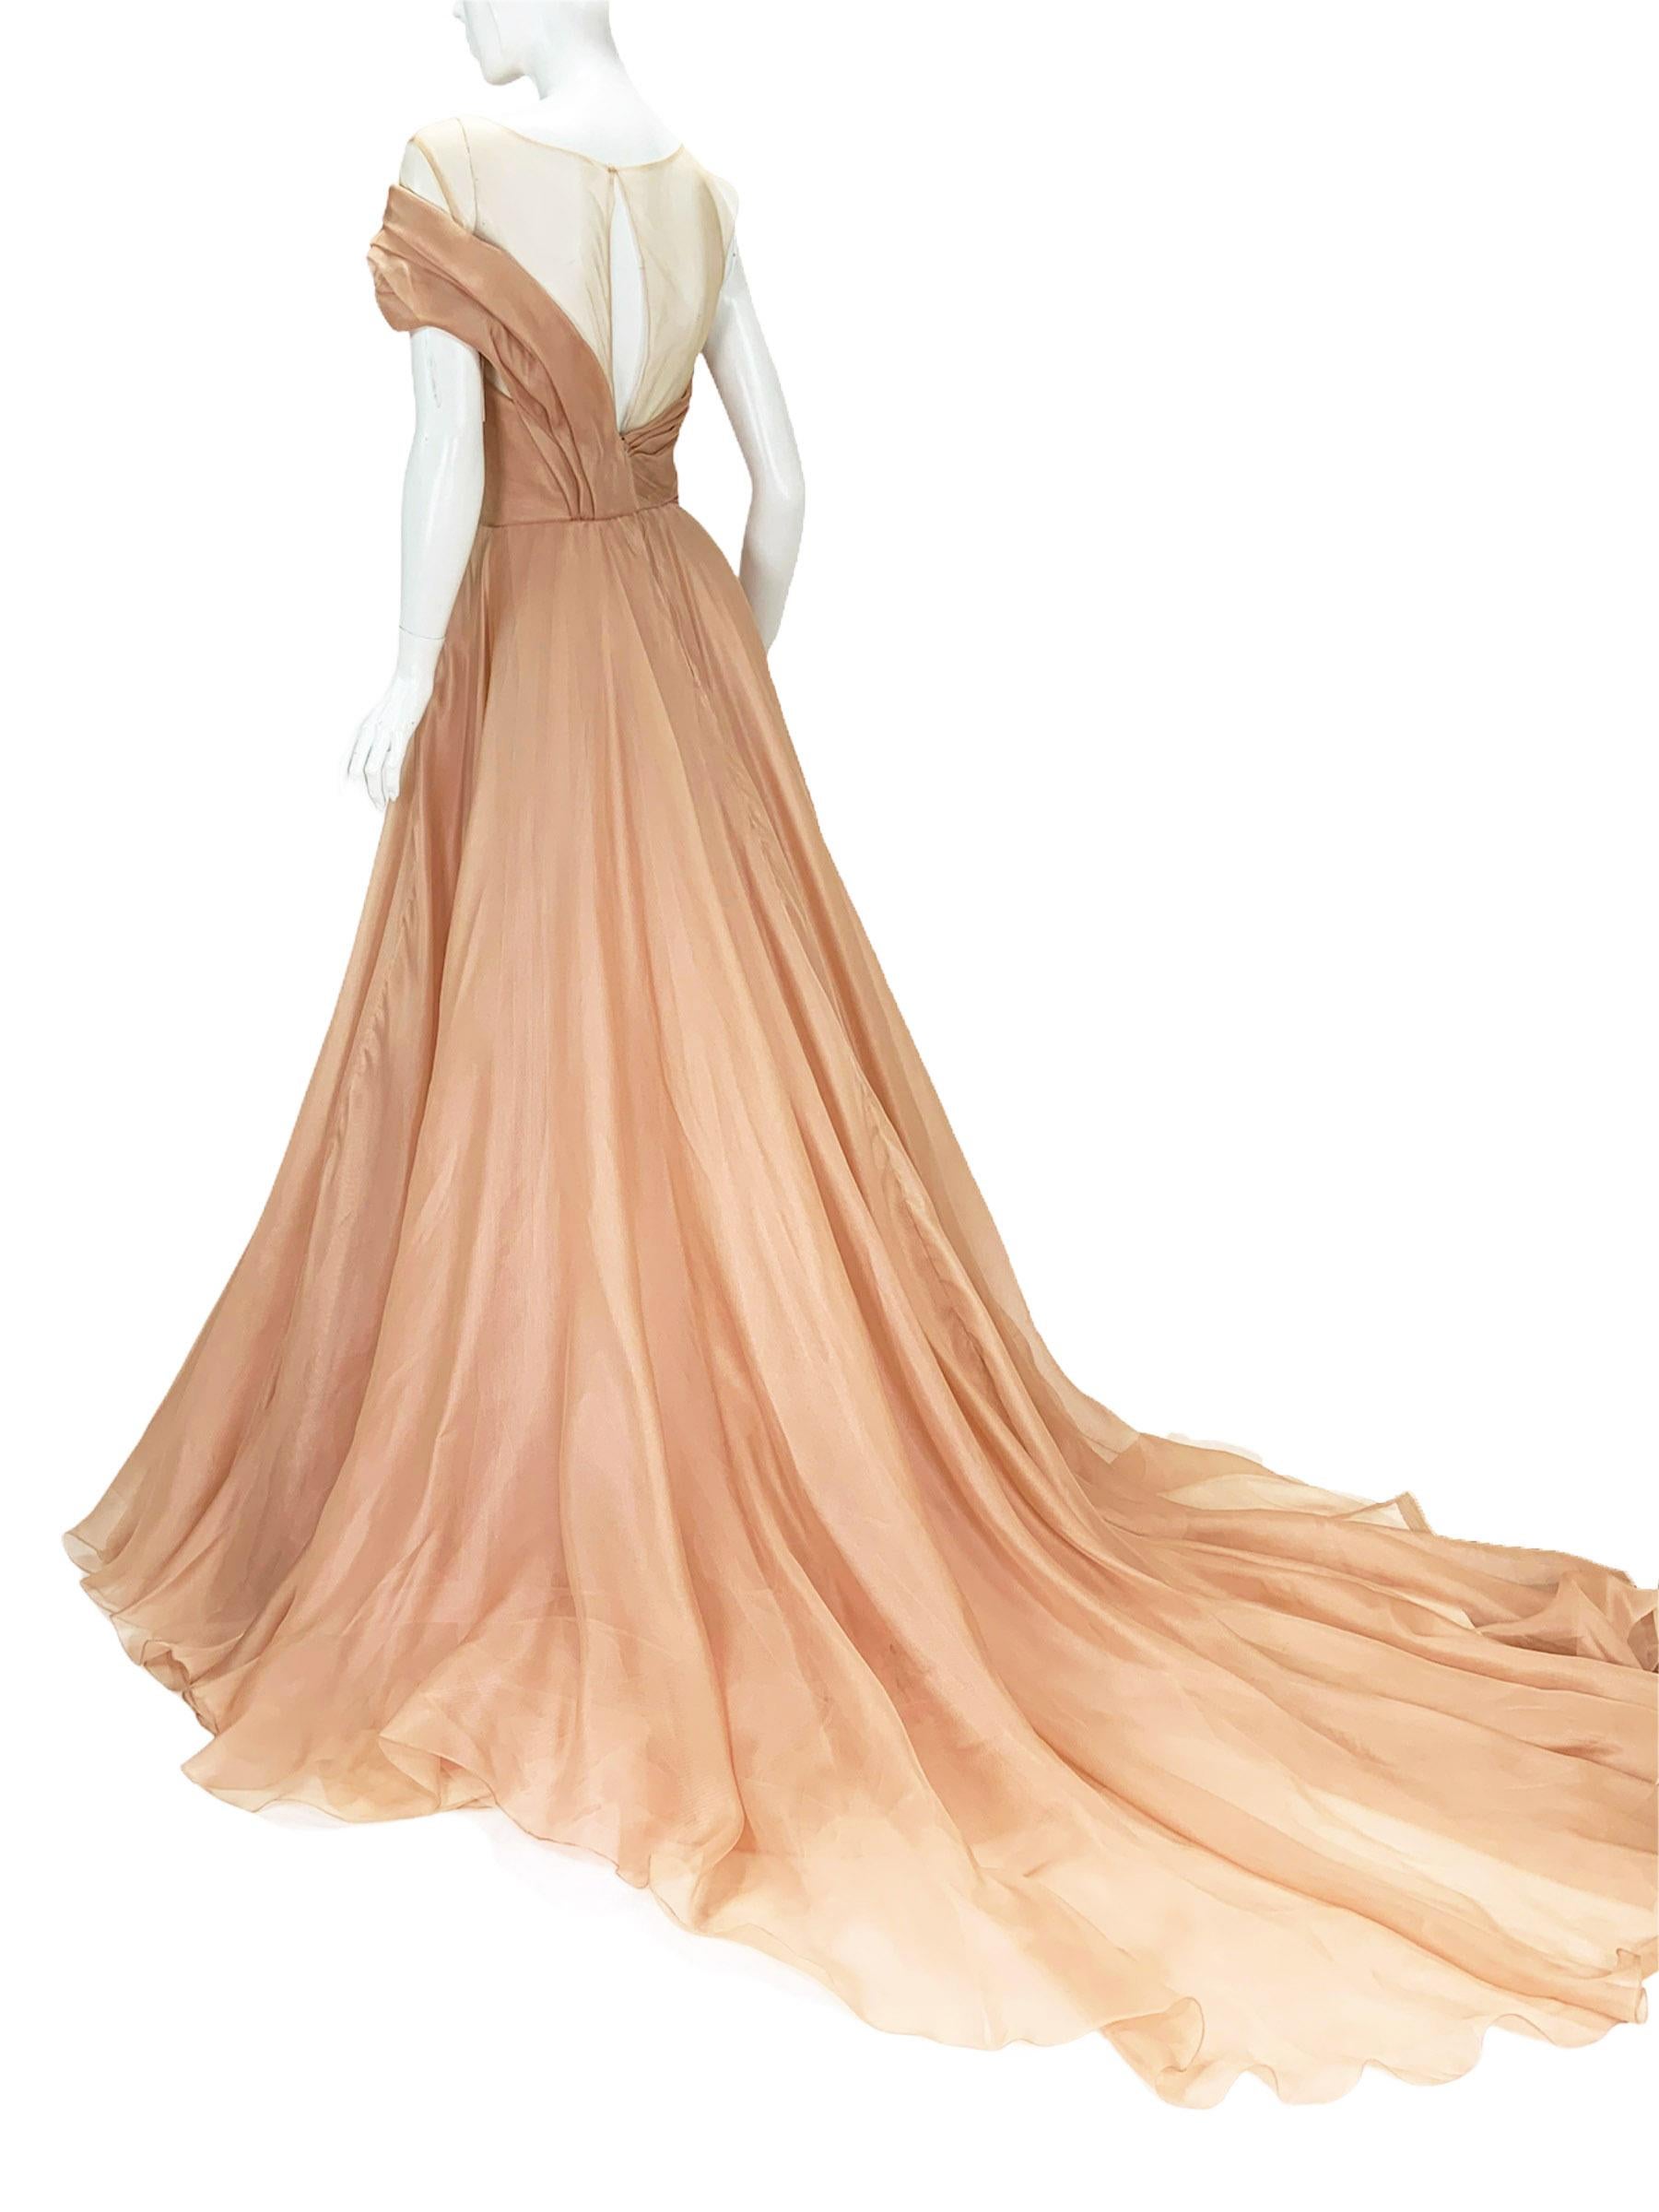 New Marchesa Wedding Ball Silk Dress Gown - Elegant and Classy!!!
Designer size - 4 ( USA )
Designer color - Nude
100% Silk, Delicate Draping is Finished with Floral Detail, Double Silk Lining, Double Tulle Lining for Airy Rich Volume.
Measurements: